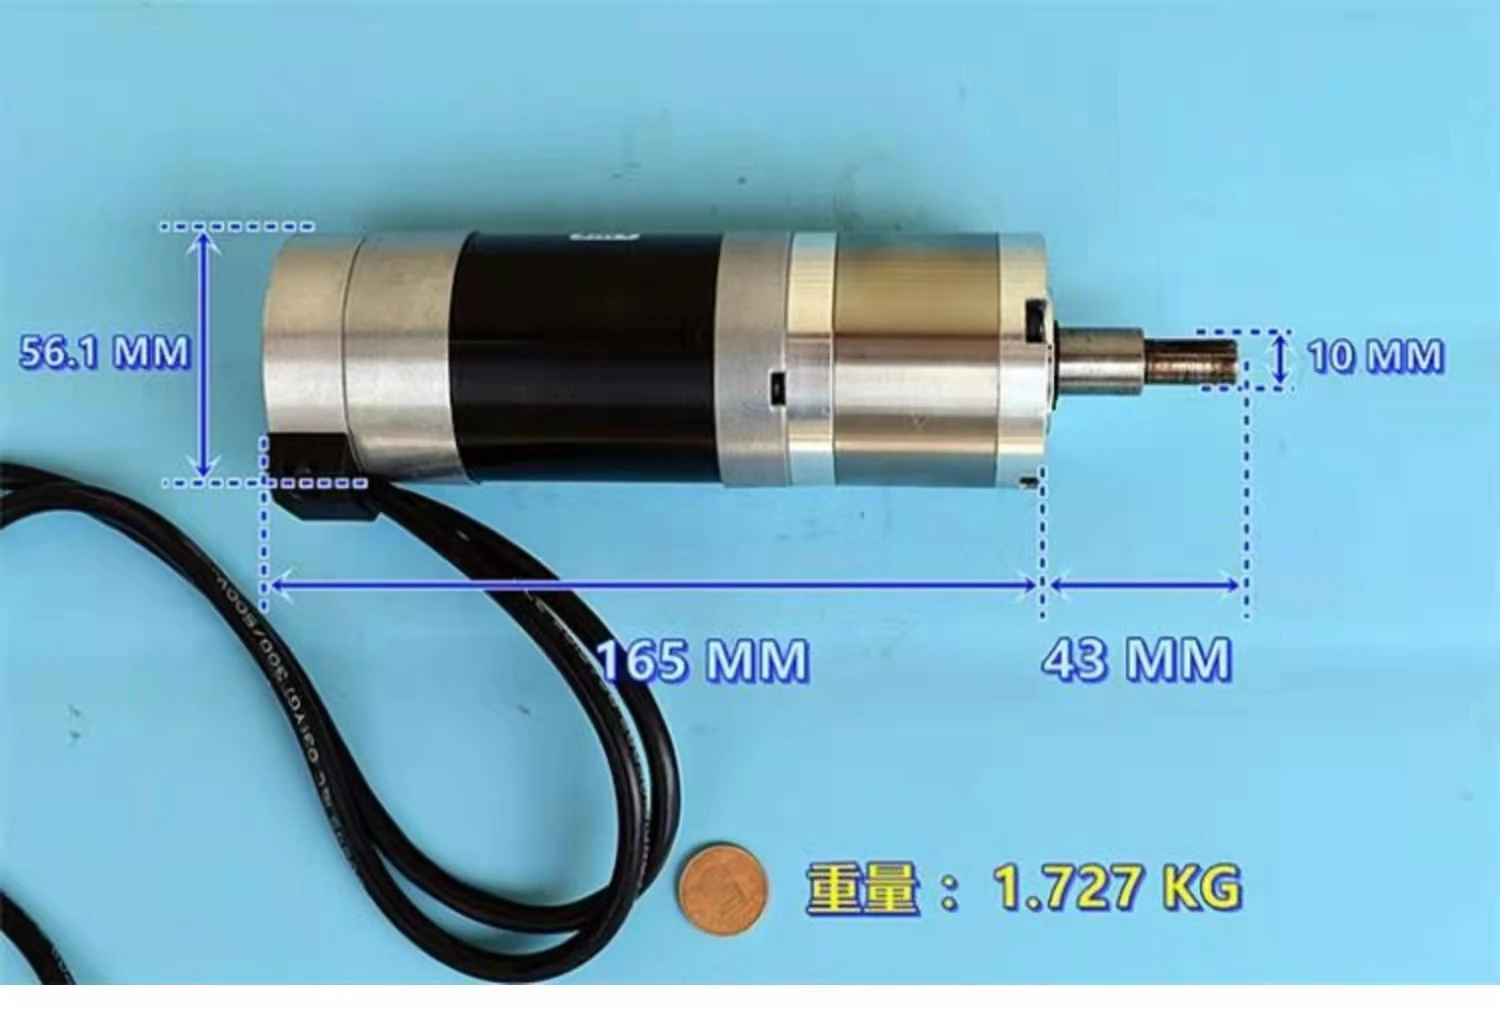 All-metal gear planetary DC deceleration DC36V three-phase brushless motor with servo feedback high torque rmd x8s2 v3 1 36 robot servo gear motor 48v high torque planetary reduction motor outrunner brushless can and rs485 protocol